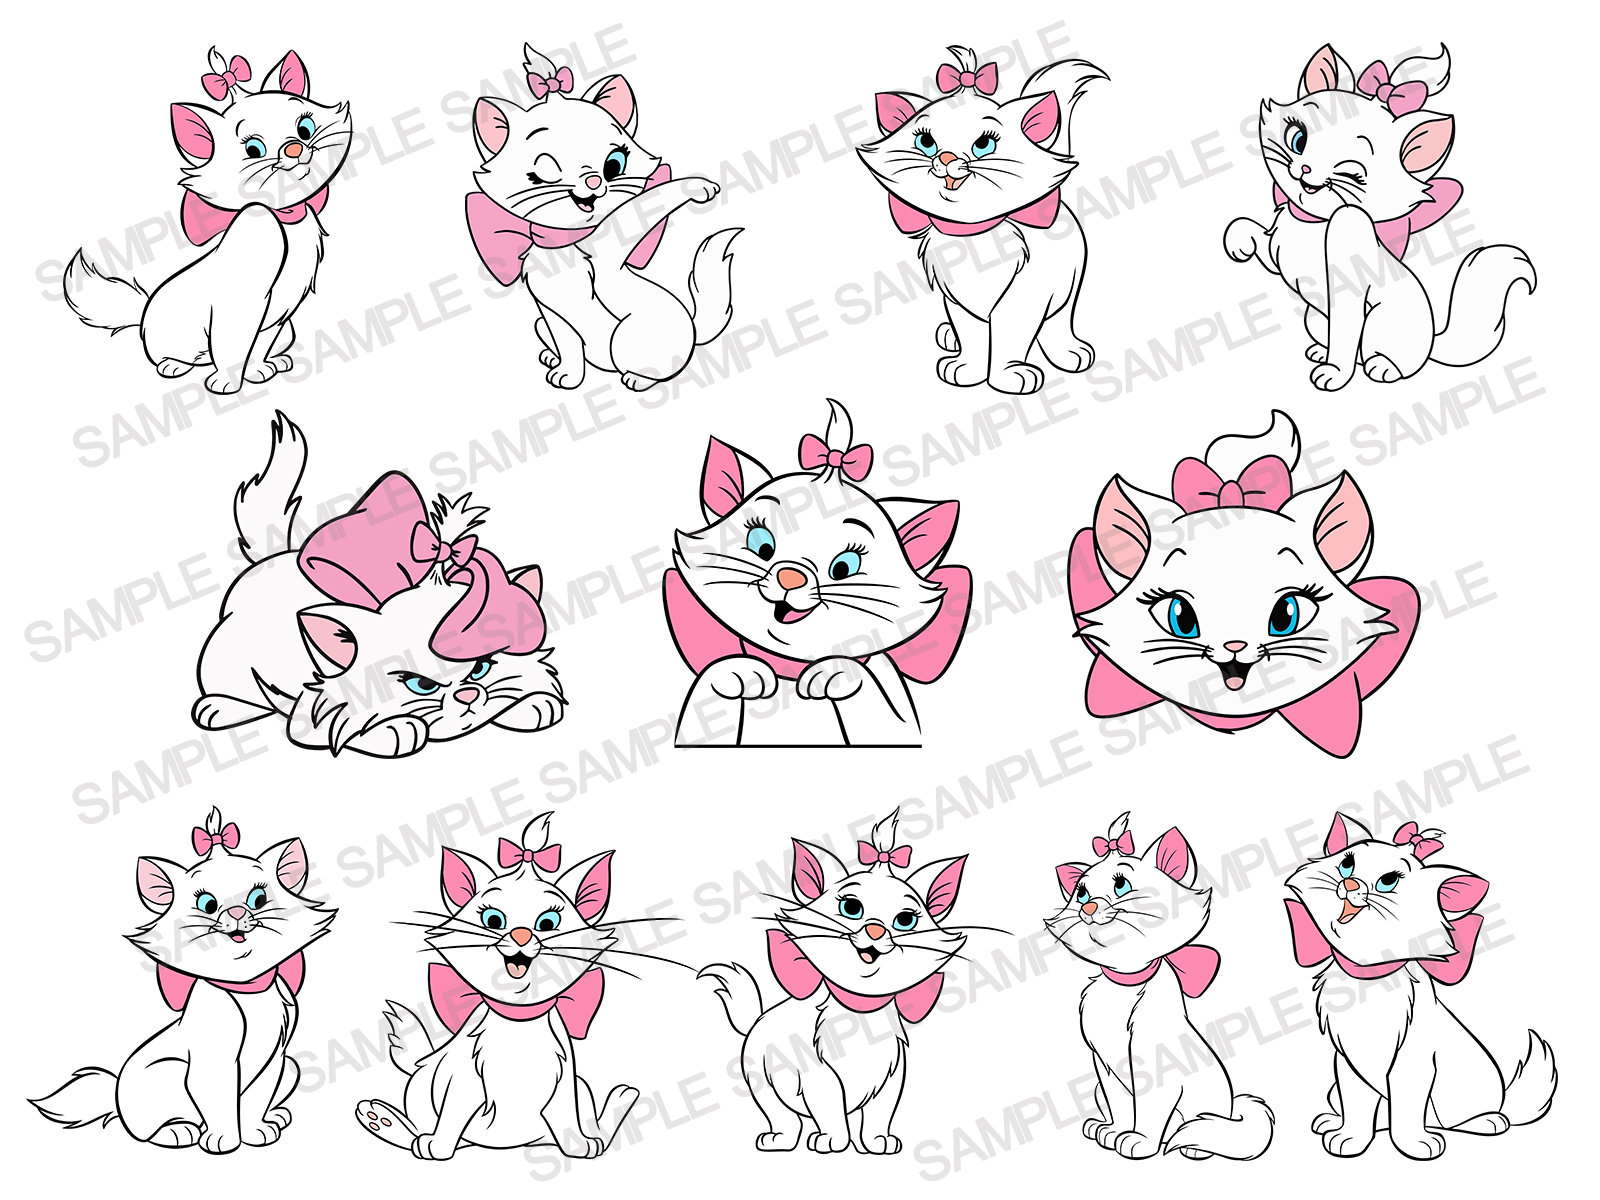 Layered Aristocat Marie, Aristocats SVG and PNG